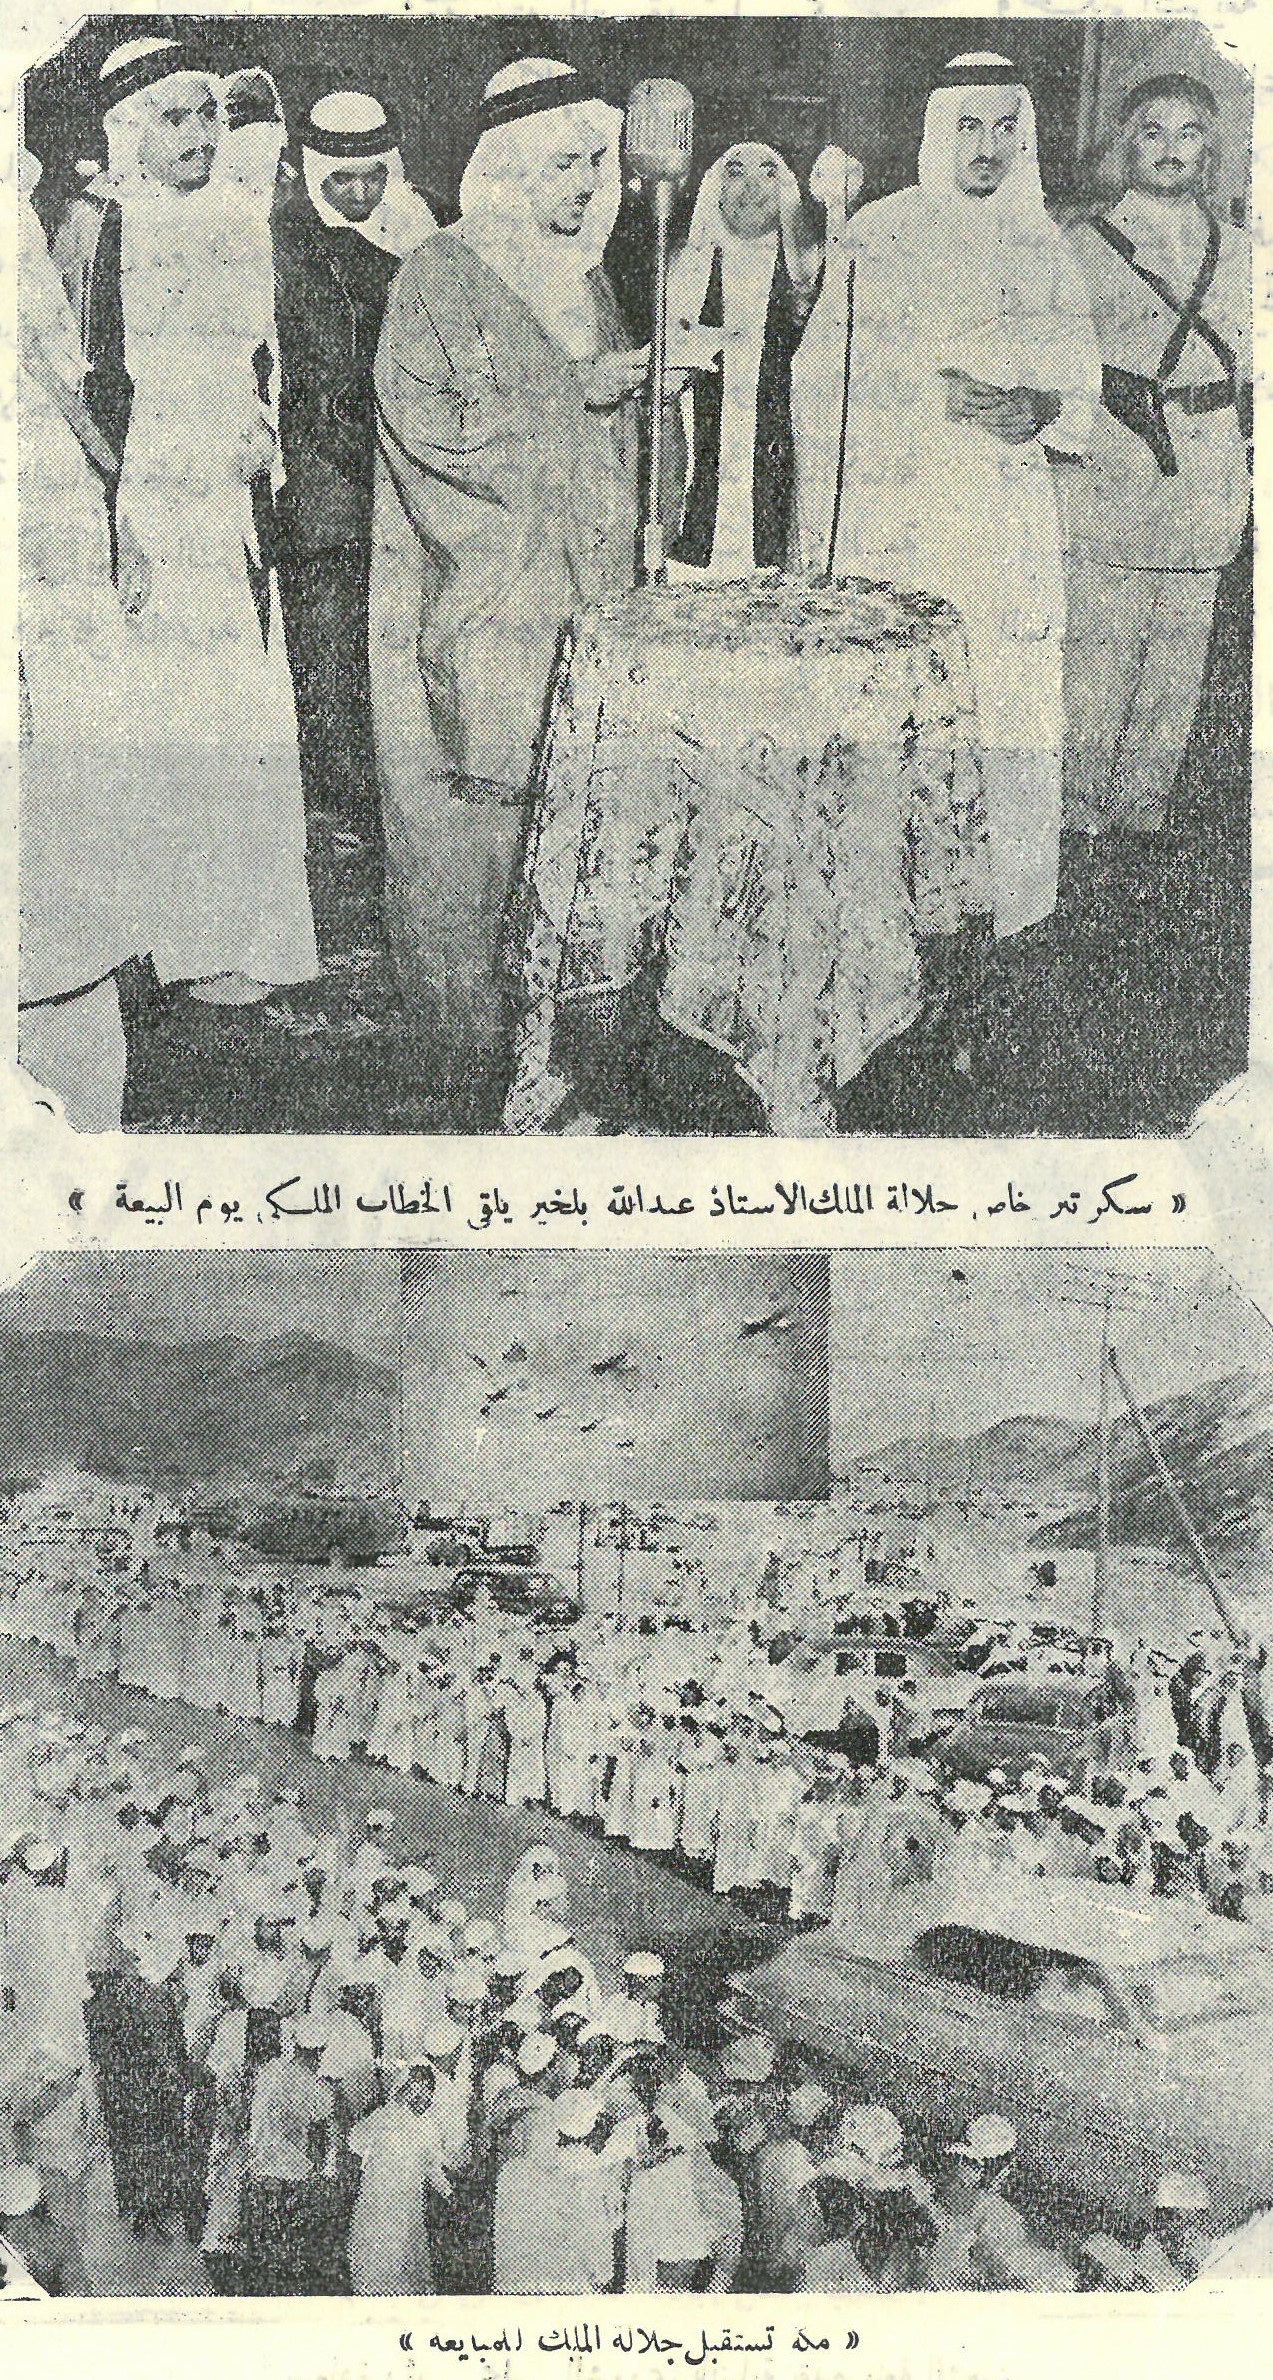 Abdullah Boulkheir King Saud secretary delivering a speech on the allegiance day, and the people welcoming King Saud 1954